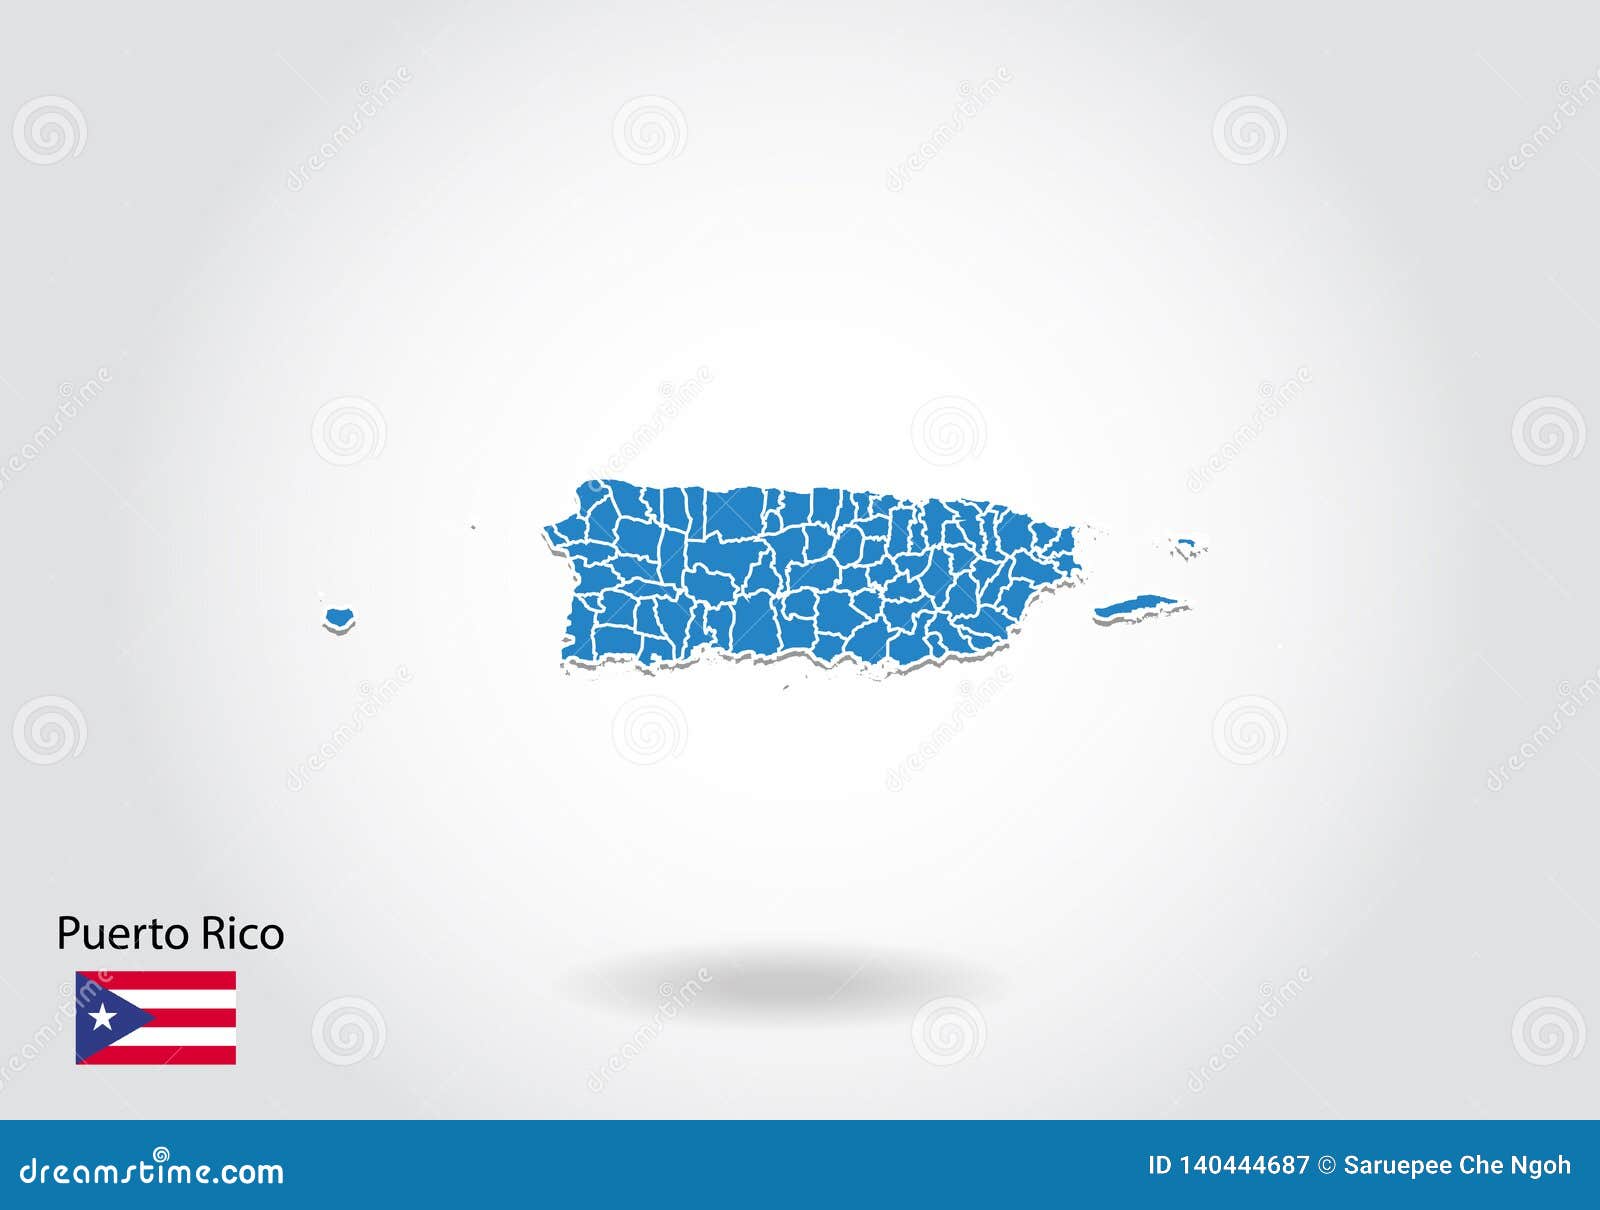 Puerto Rico Map Design With 3d Style Blue Puerto Rico Map And National Flag Simple Vector Map With Contour Shape Outline On Stock Vector Illustration Of Navigation Graphic